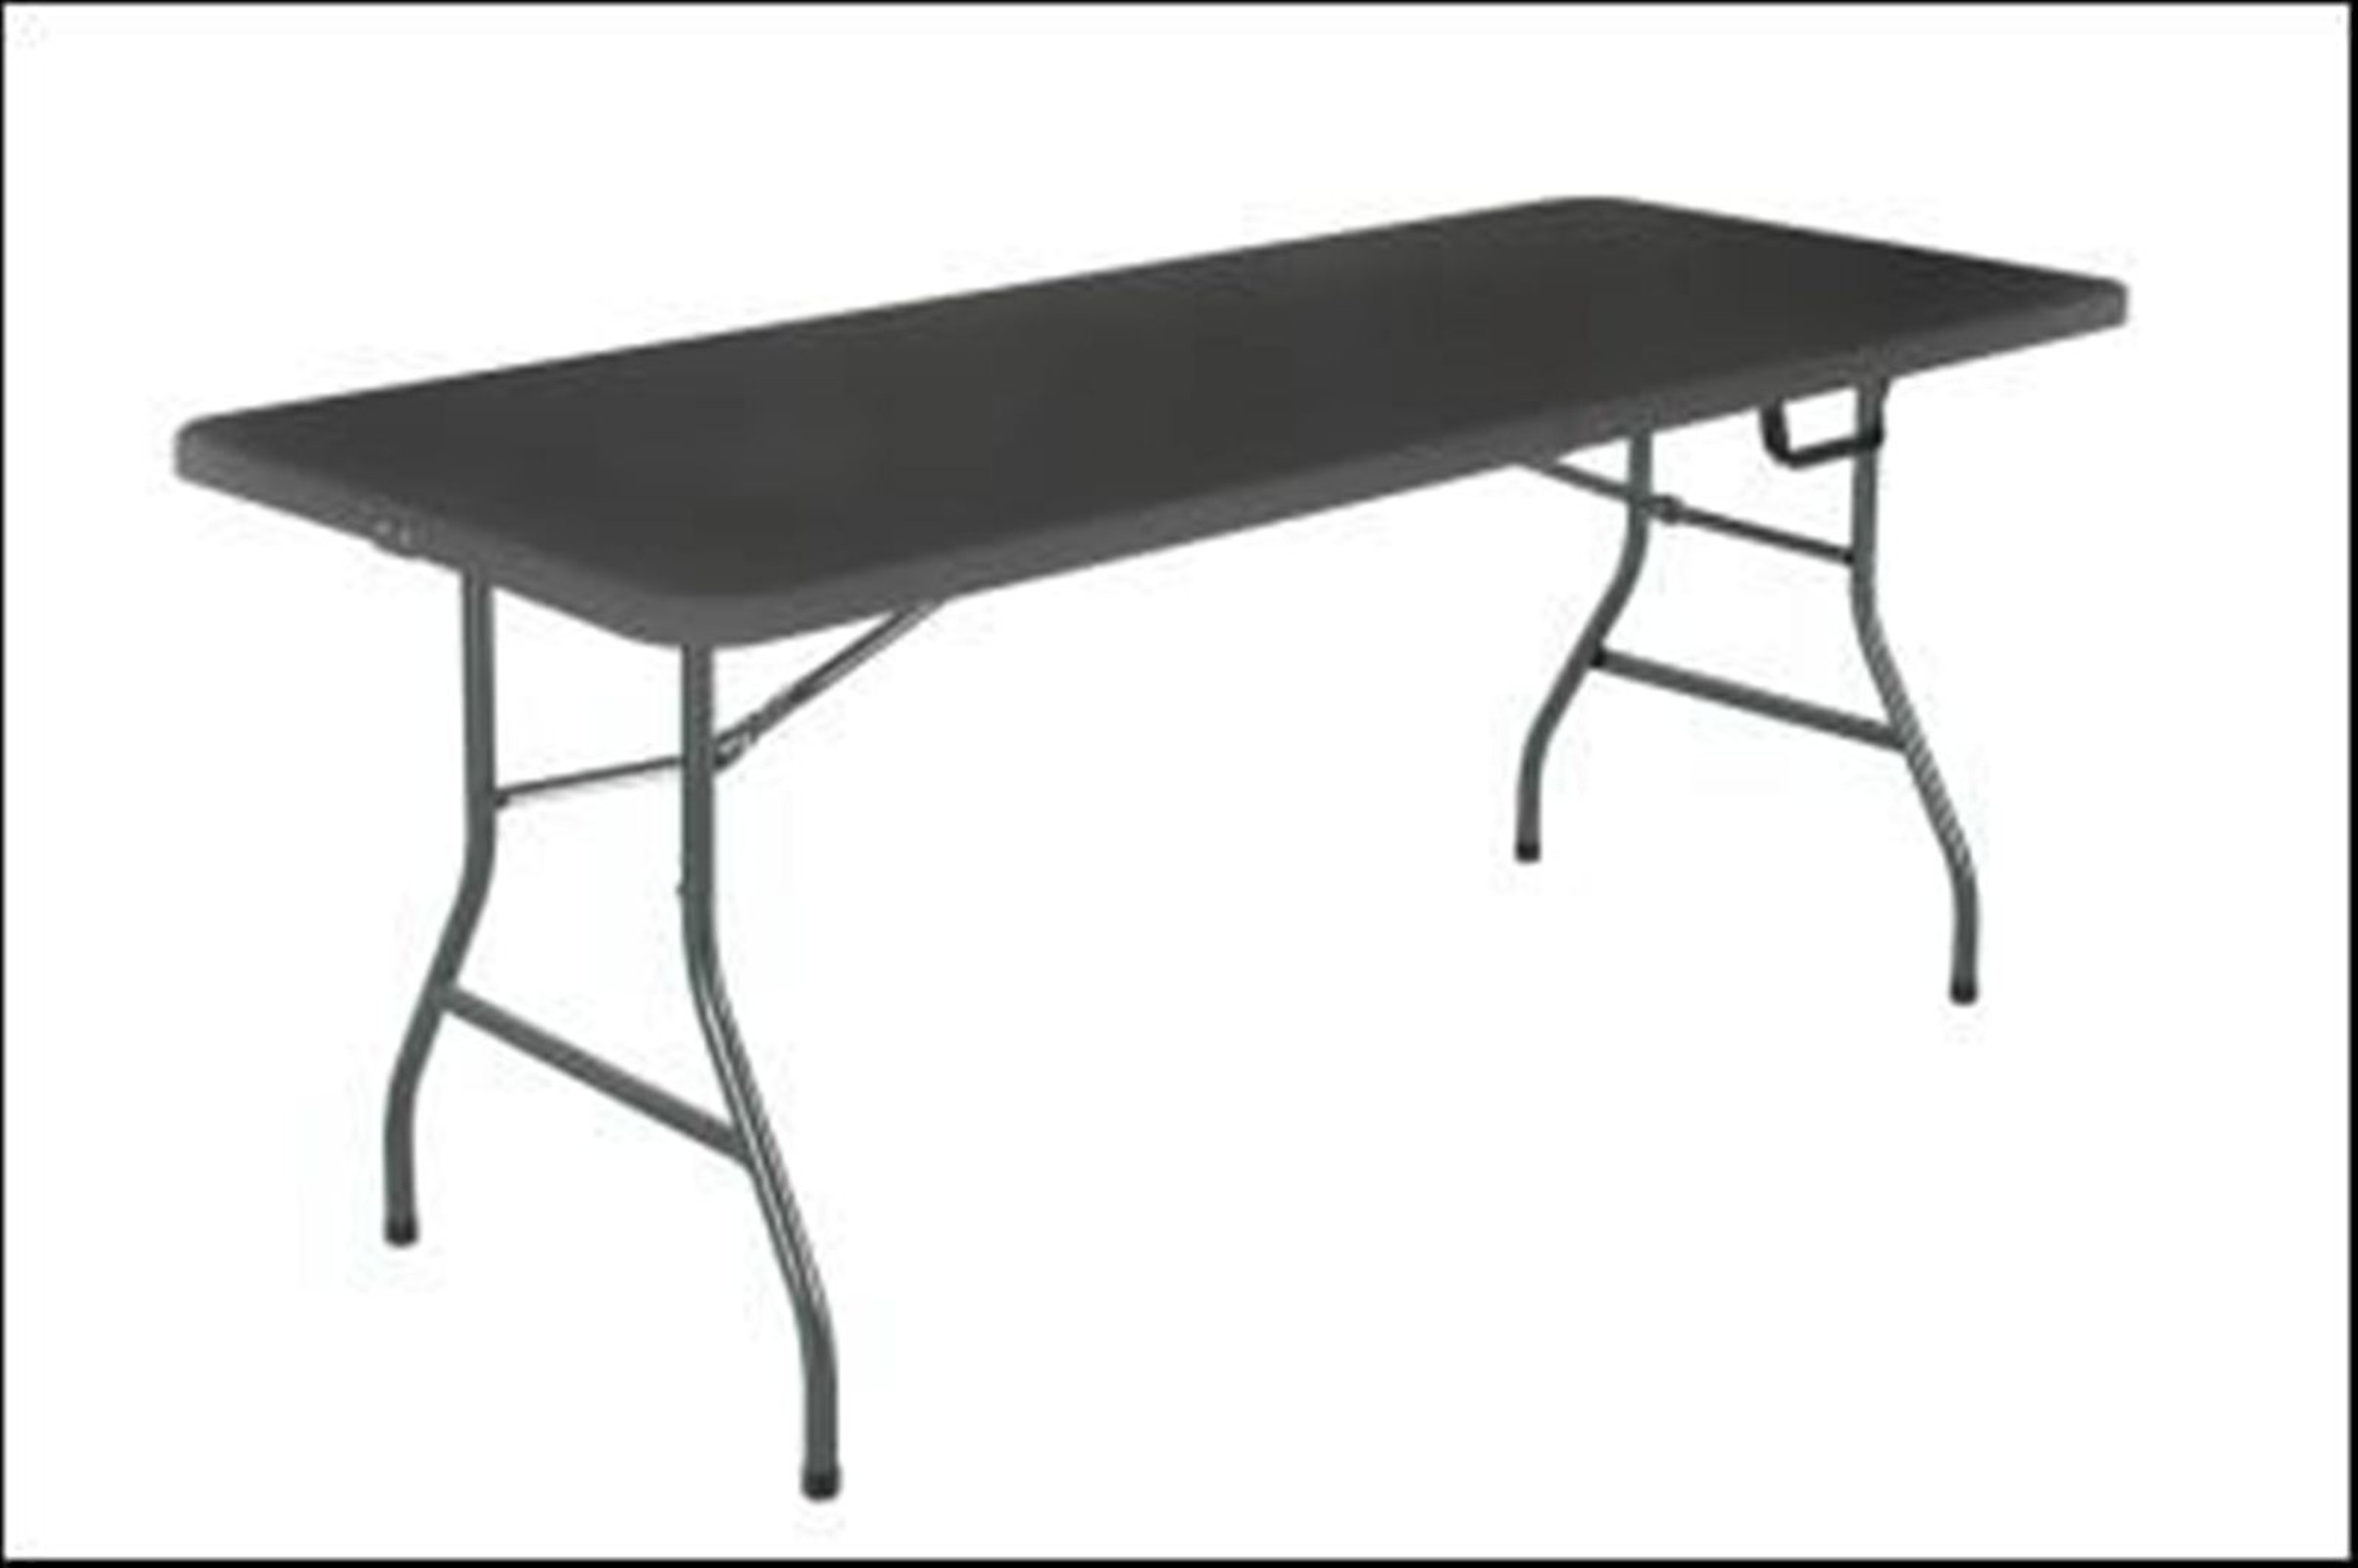 Cosco Home and Office Products 6' Centerfold Banquet Table